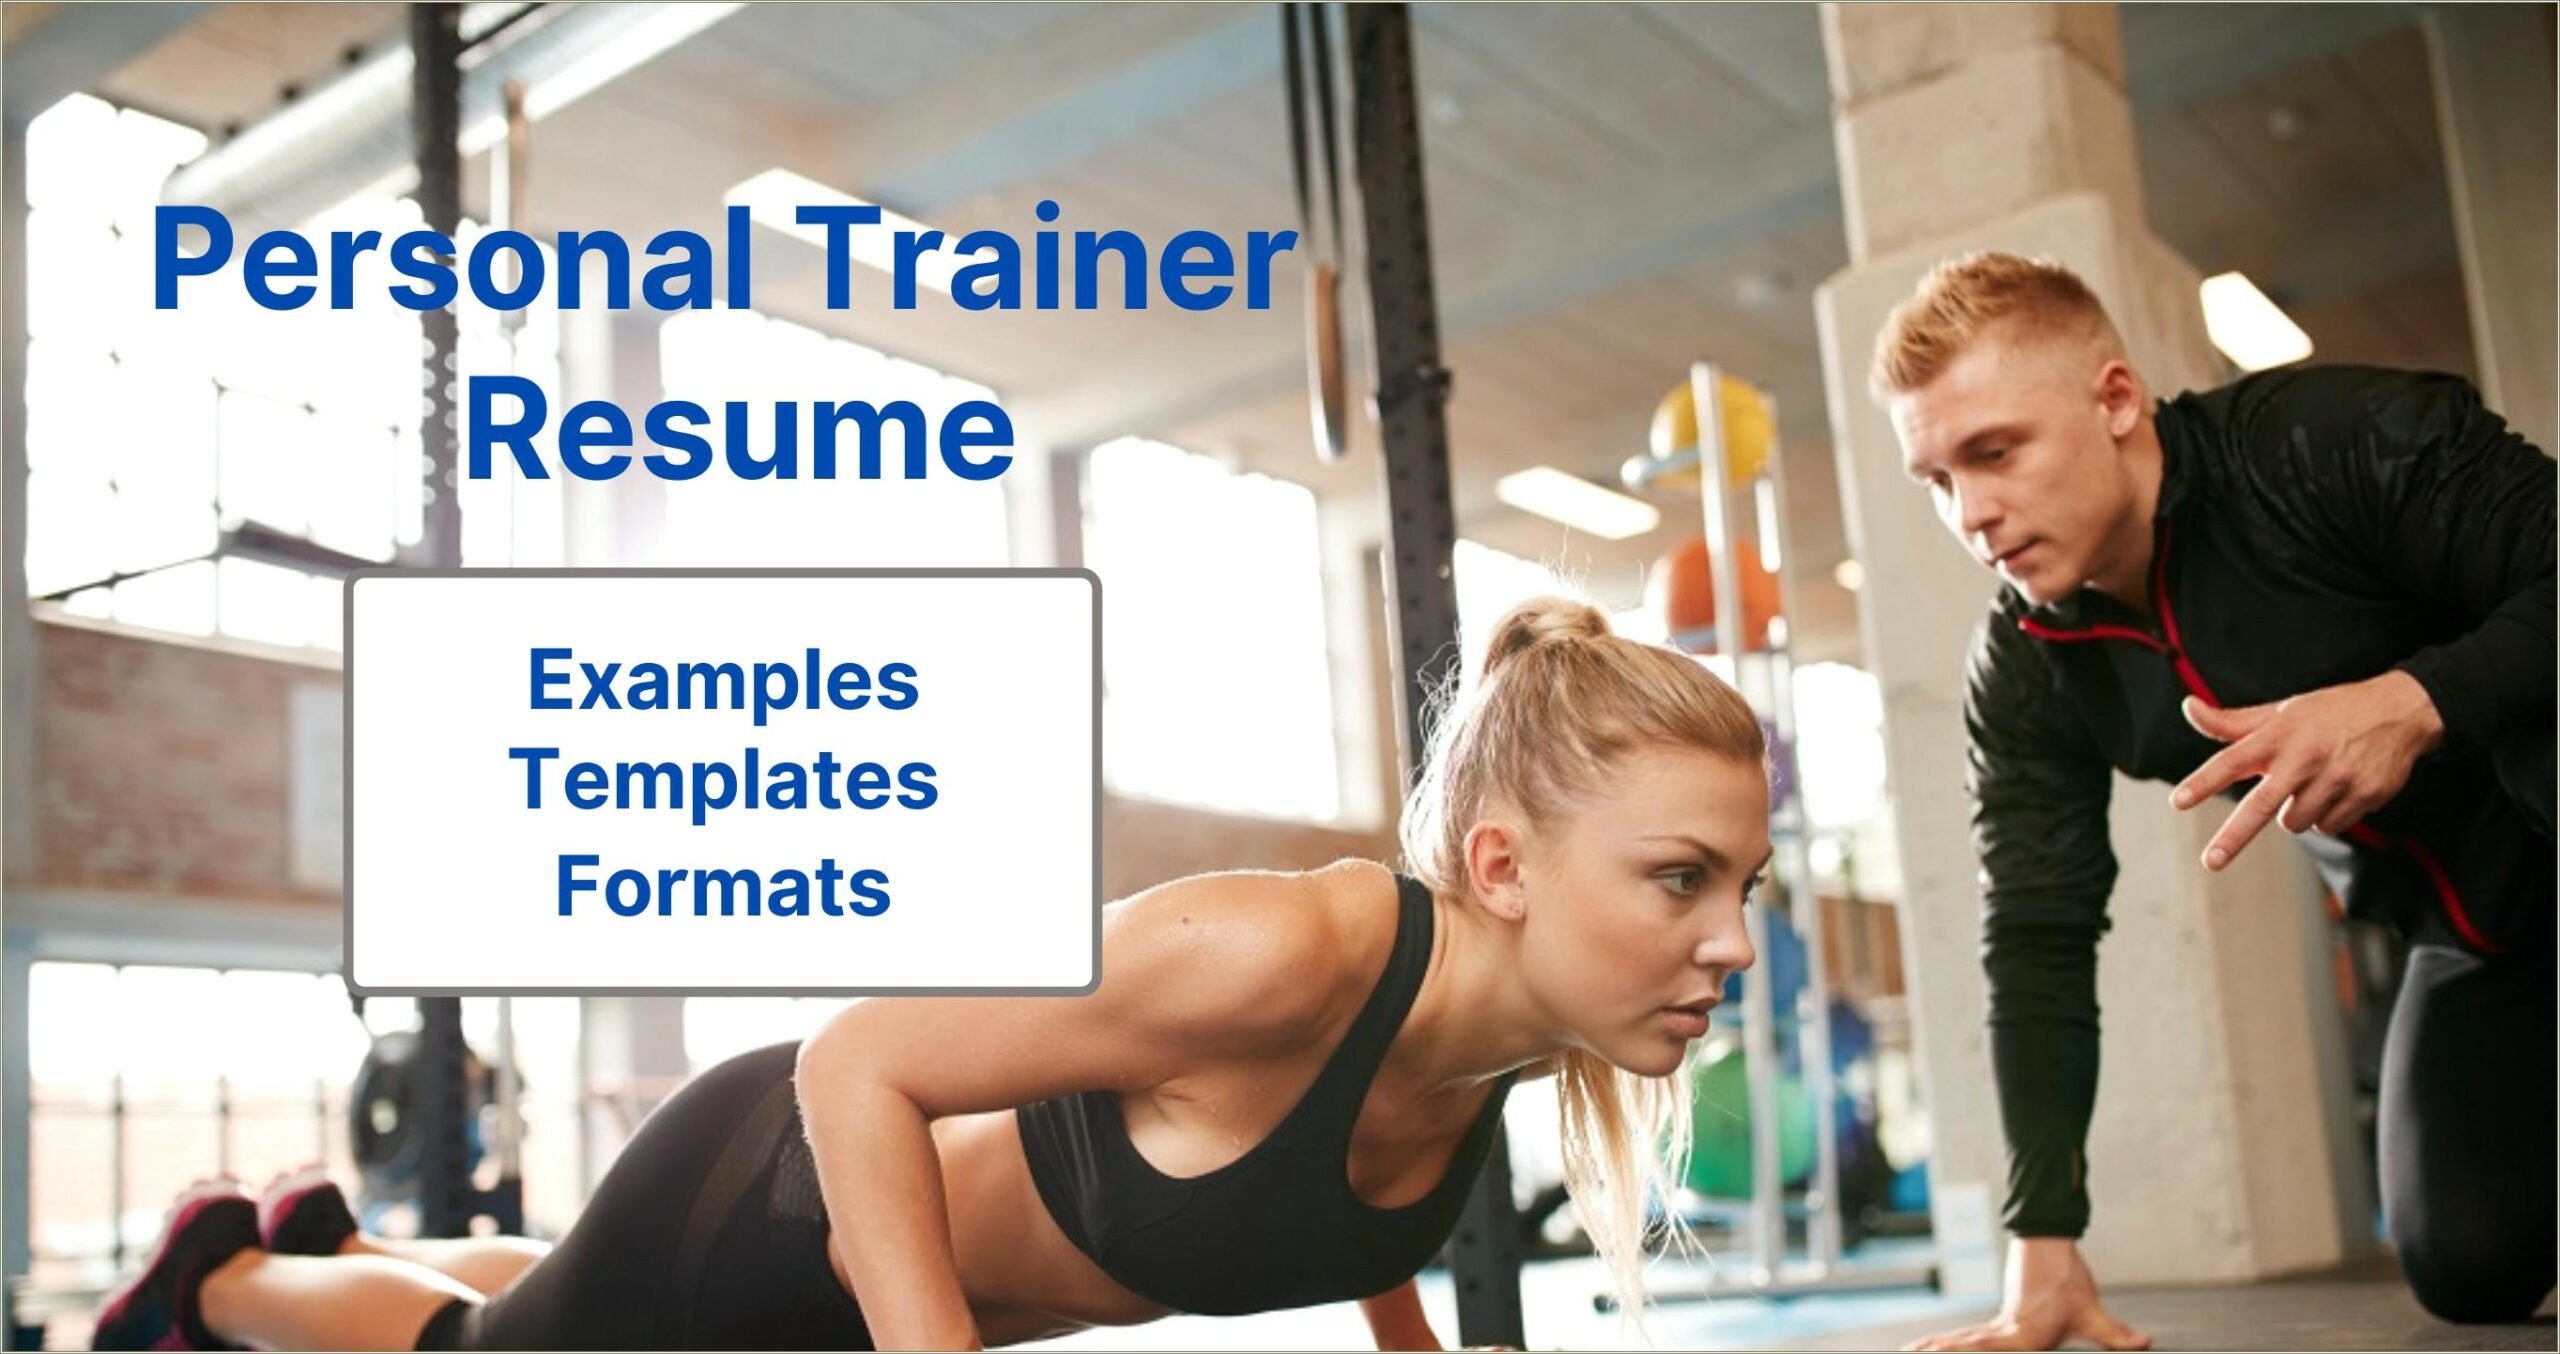 24 Hour Fitness Personal Trainer Example Resume